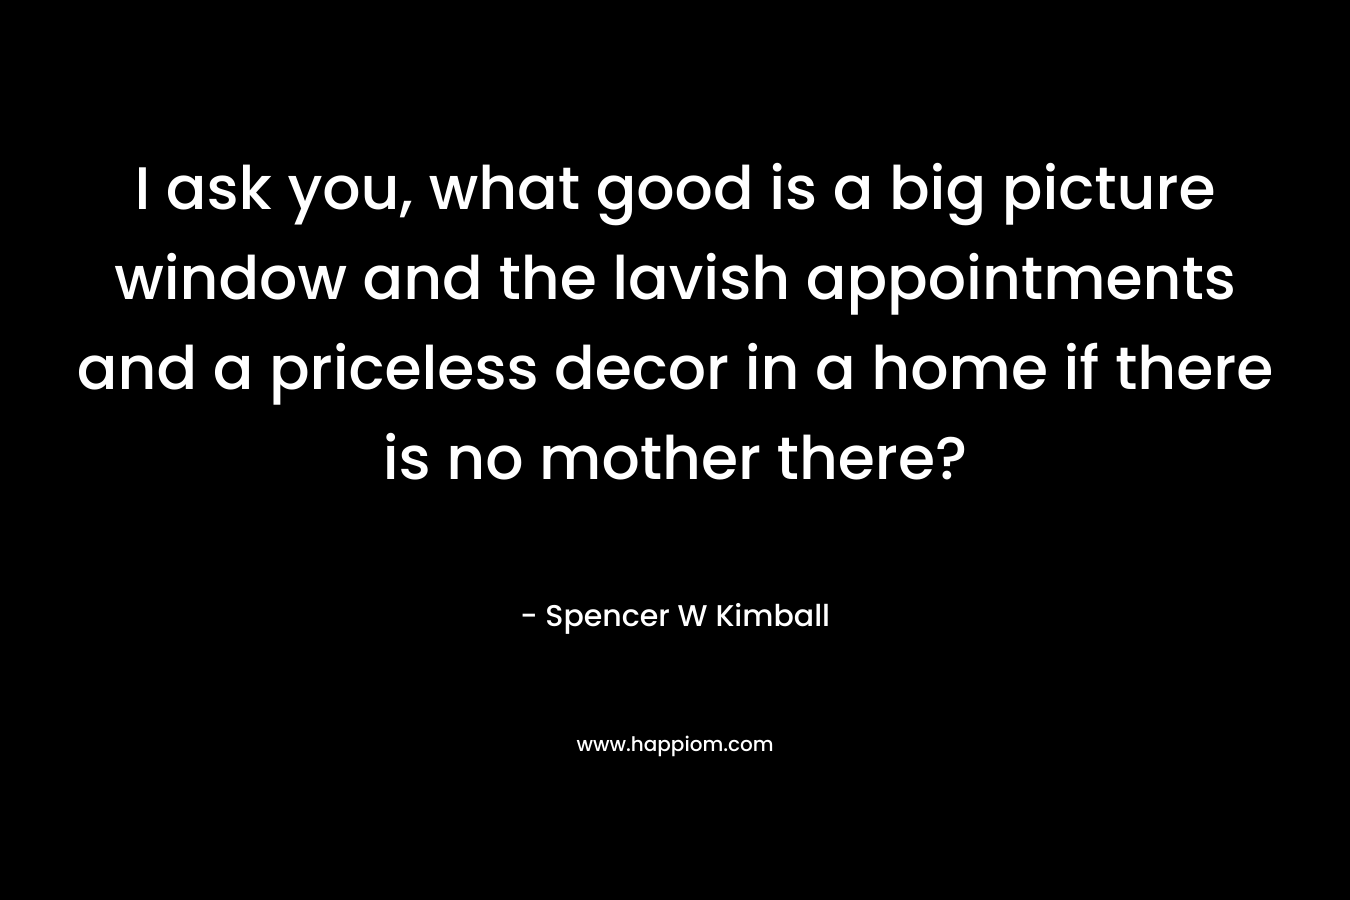 I ask you, what good is a big picture window and the lavish appointments and a priceless decor in a home if there is no mother there?